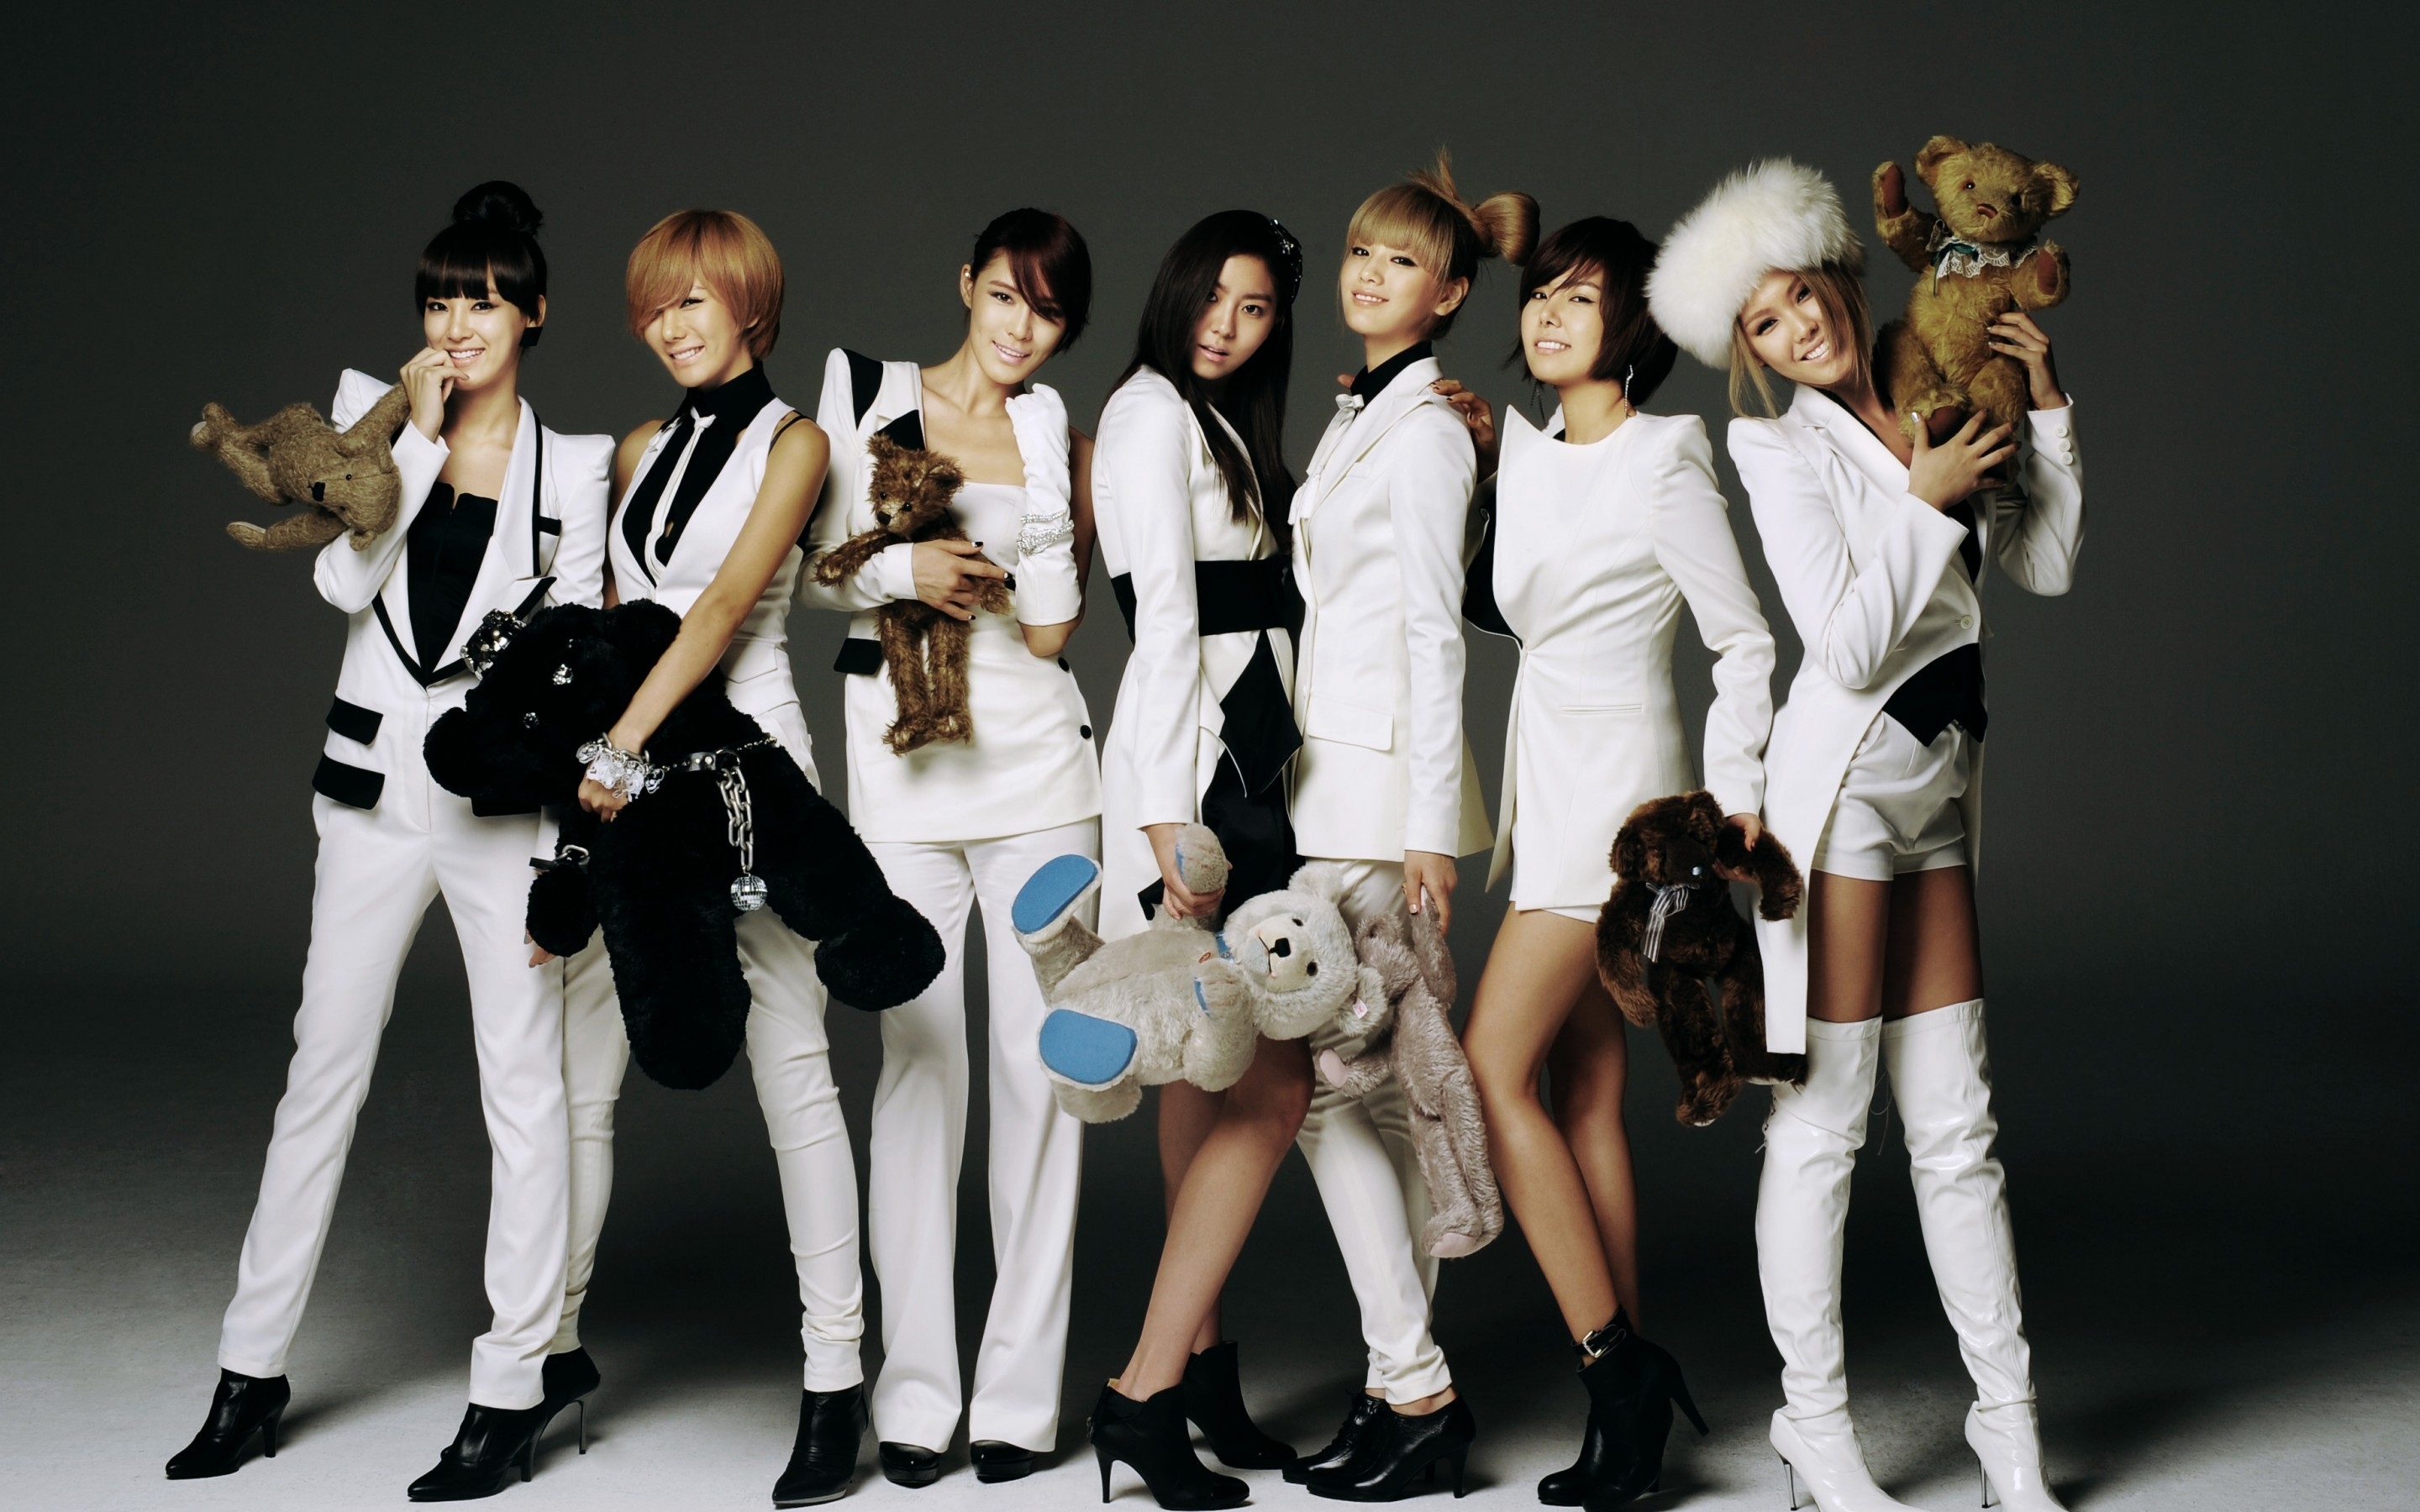 After School Band for 2880 x 1800 Retina Display resolution